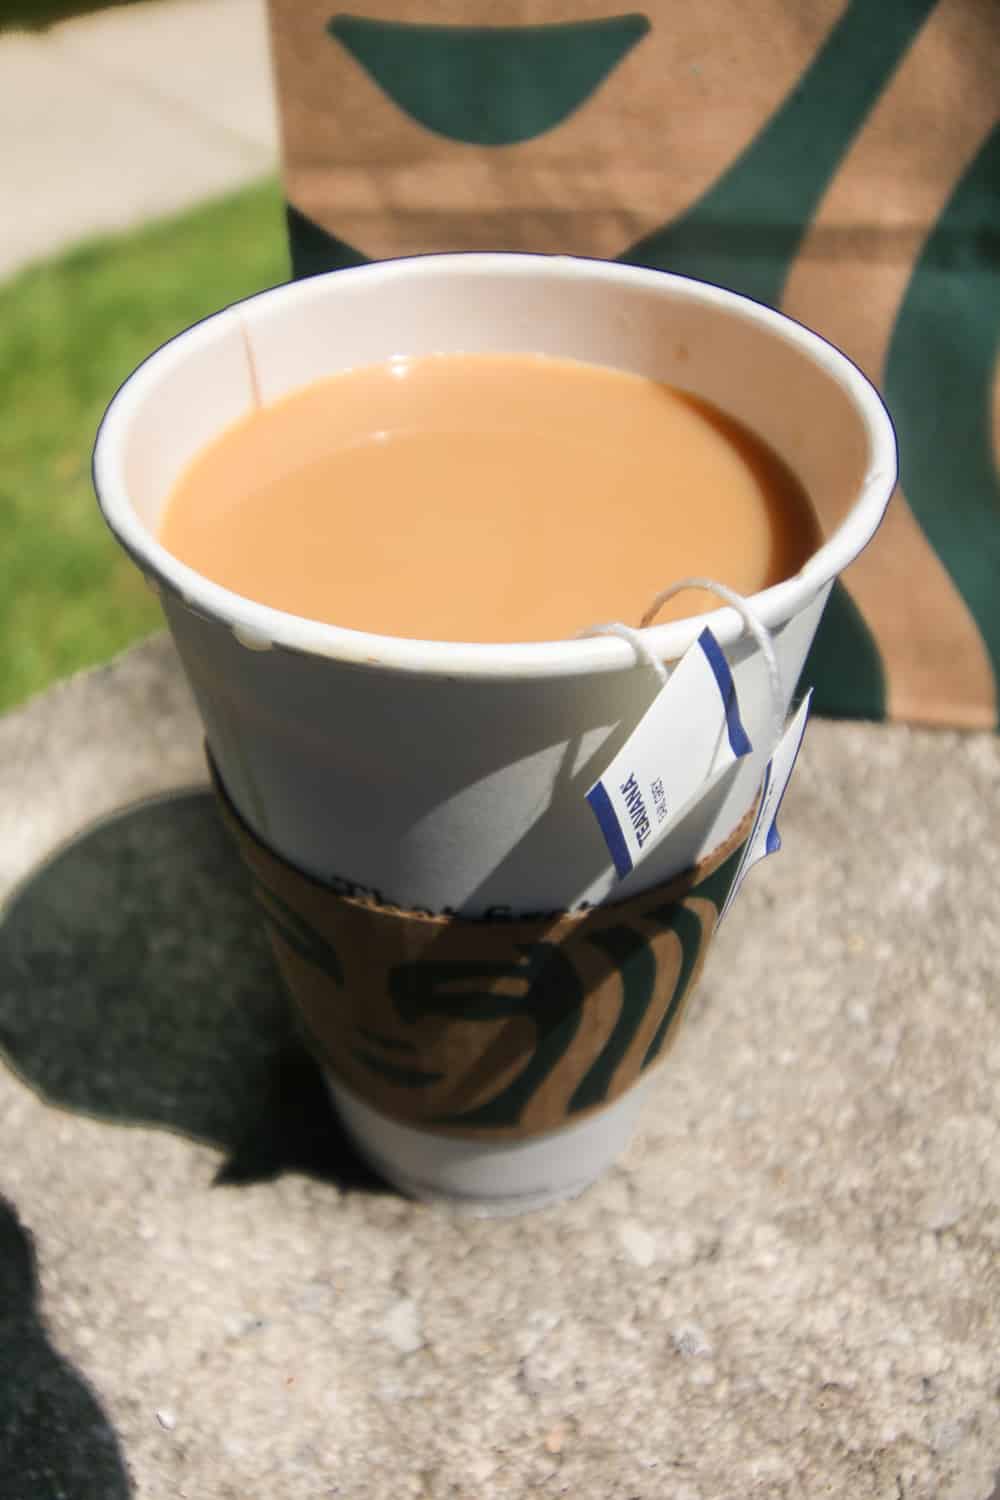 A large paper coffee cup filled with tea and cream.